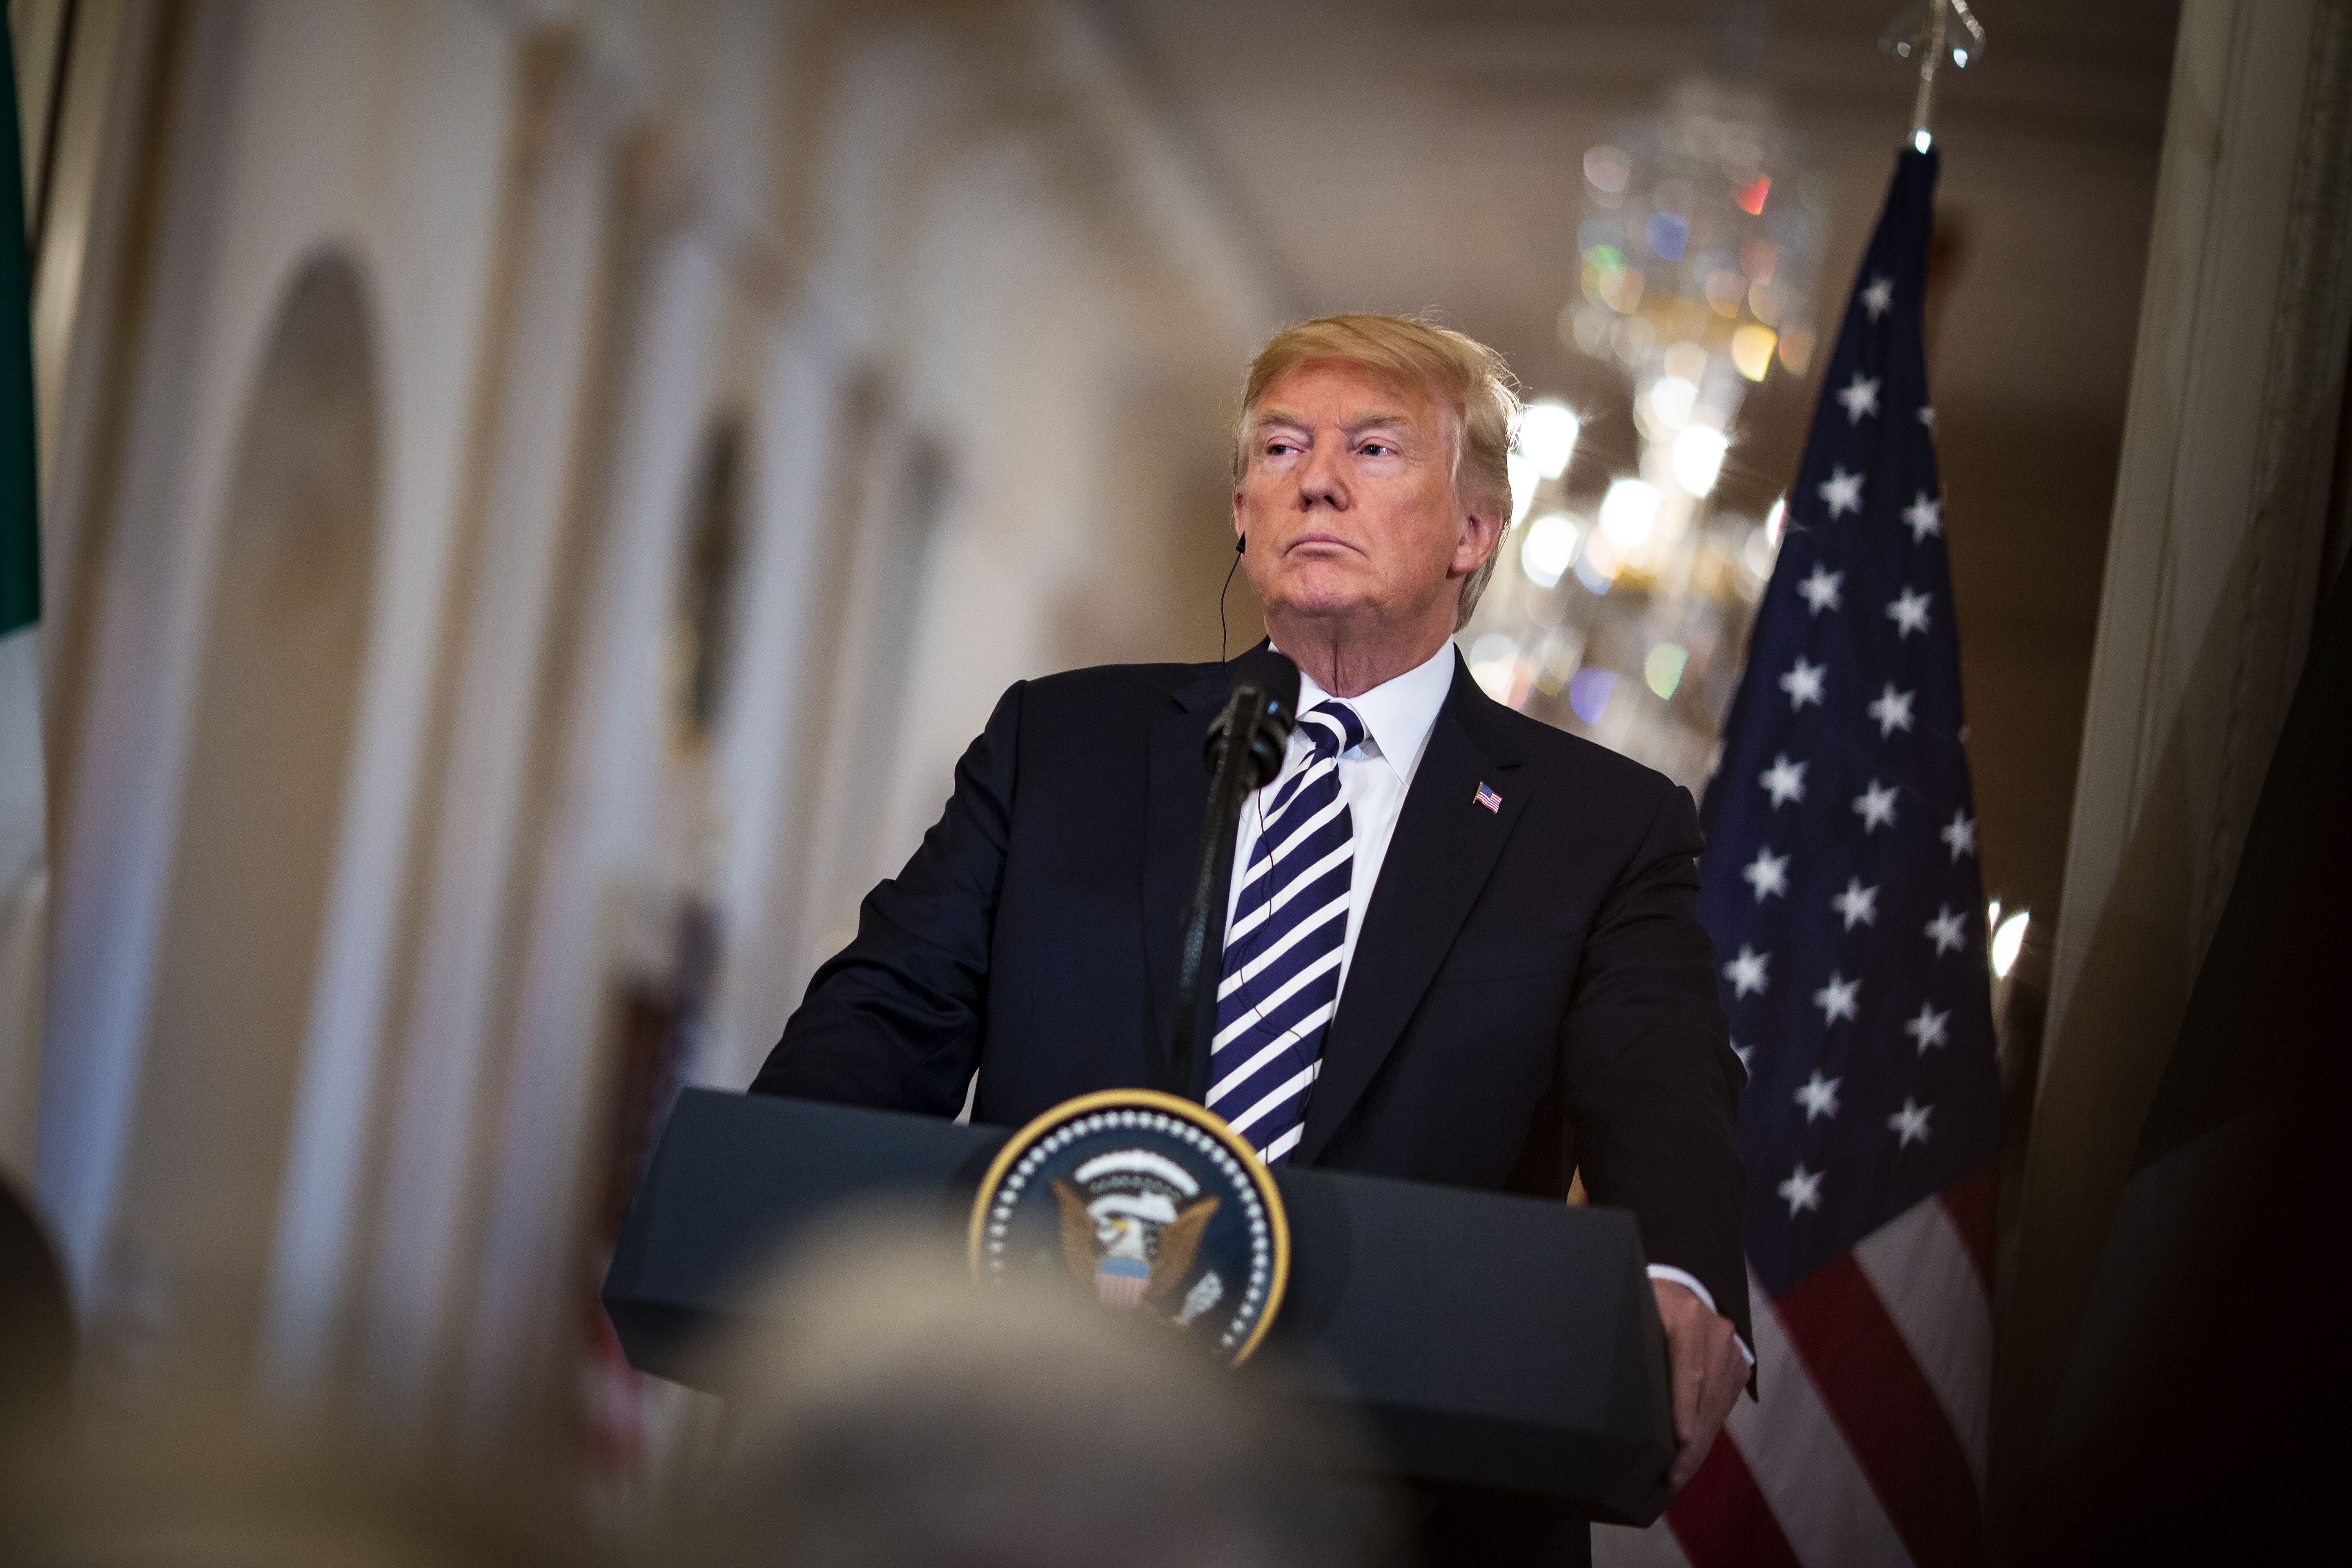 US President Donald Trump listens during a news conference in the White House in Washington on July 30. Photo: Bloomberg